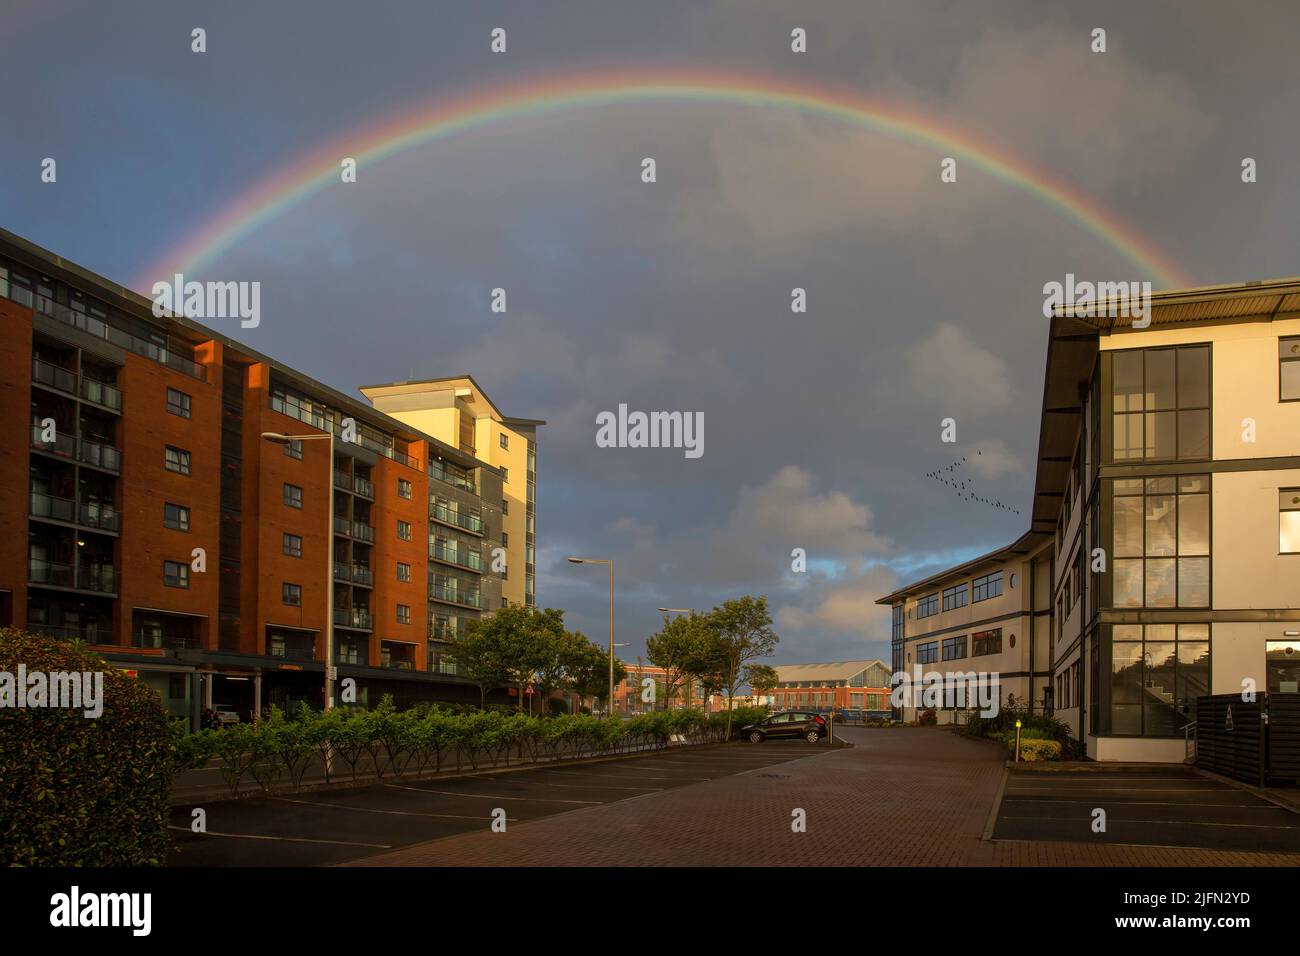 Editorial Swansea, UK - July 02, 2022: A perfect rainbow at dusk over the offices at Swansea Marina, South Wales UK Stock Photo